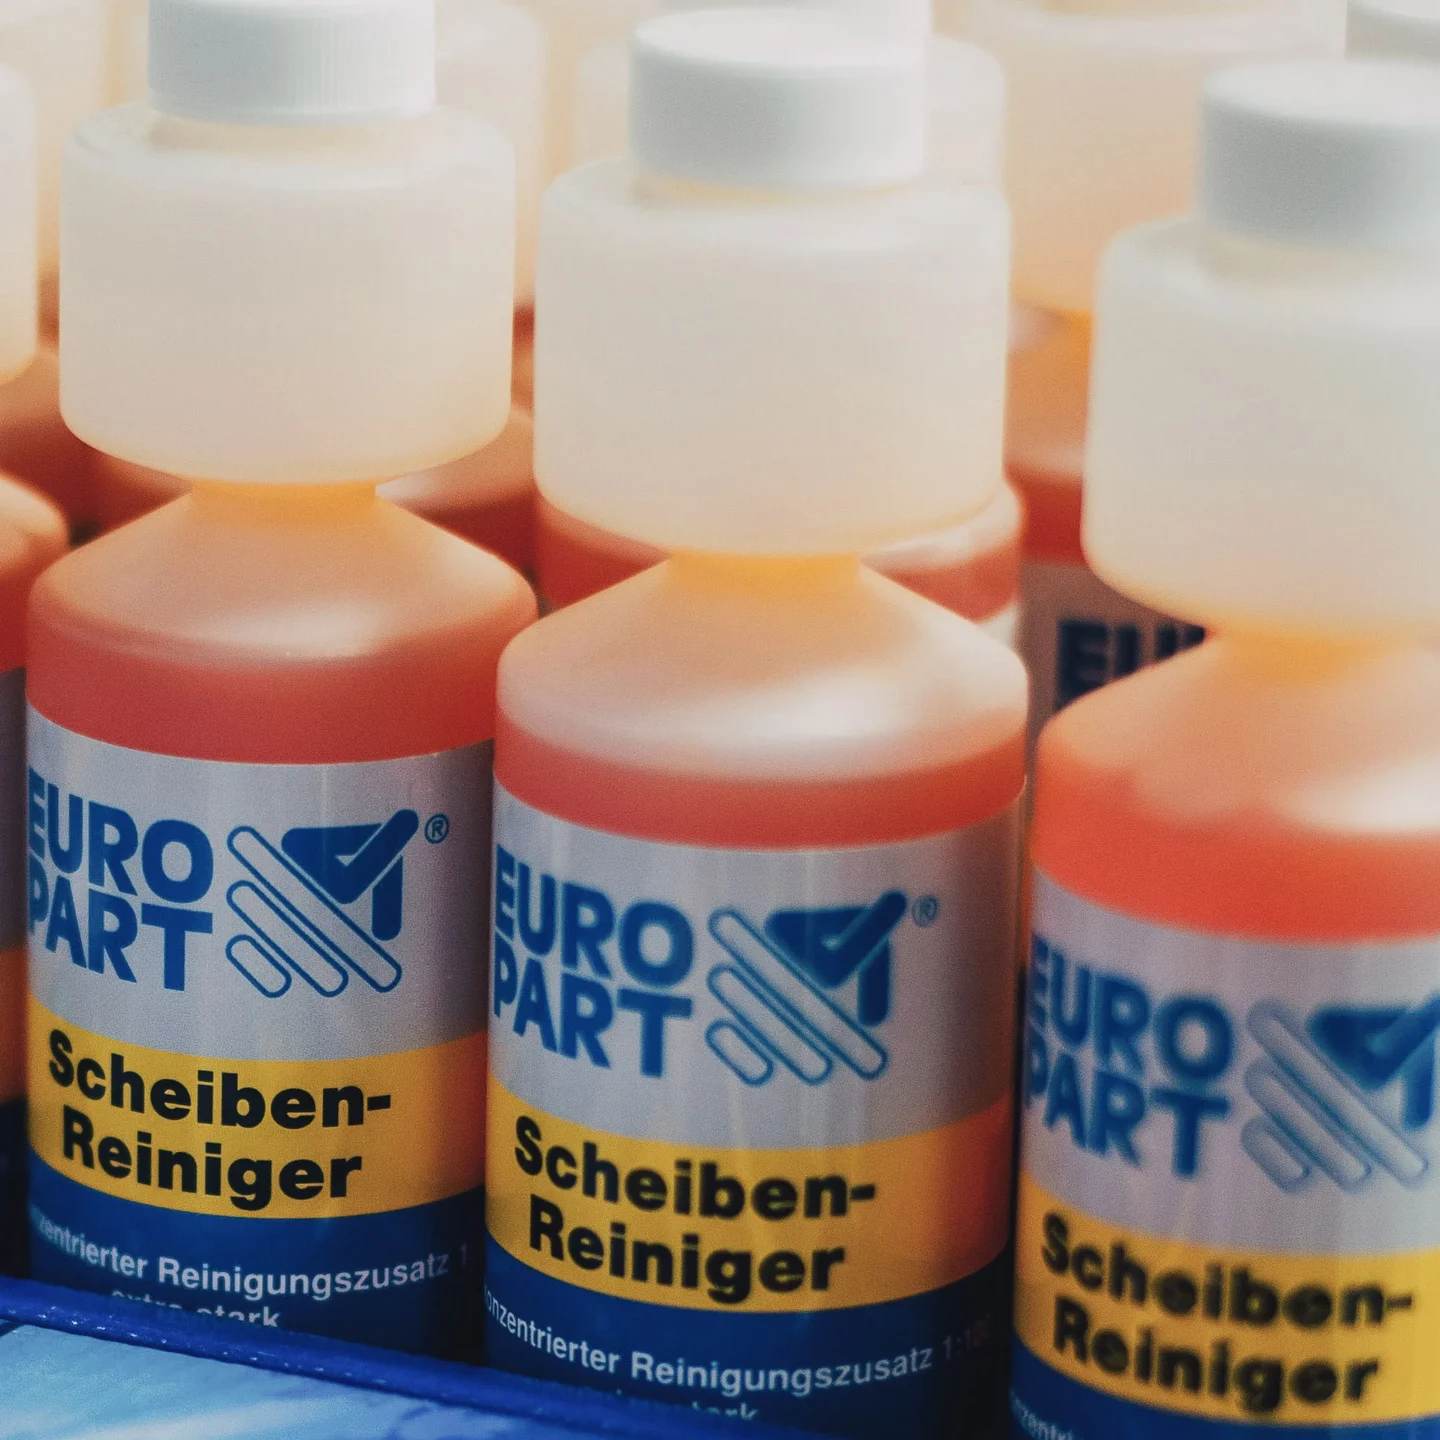 Europart bottles with disc cleaner